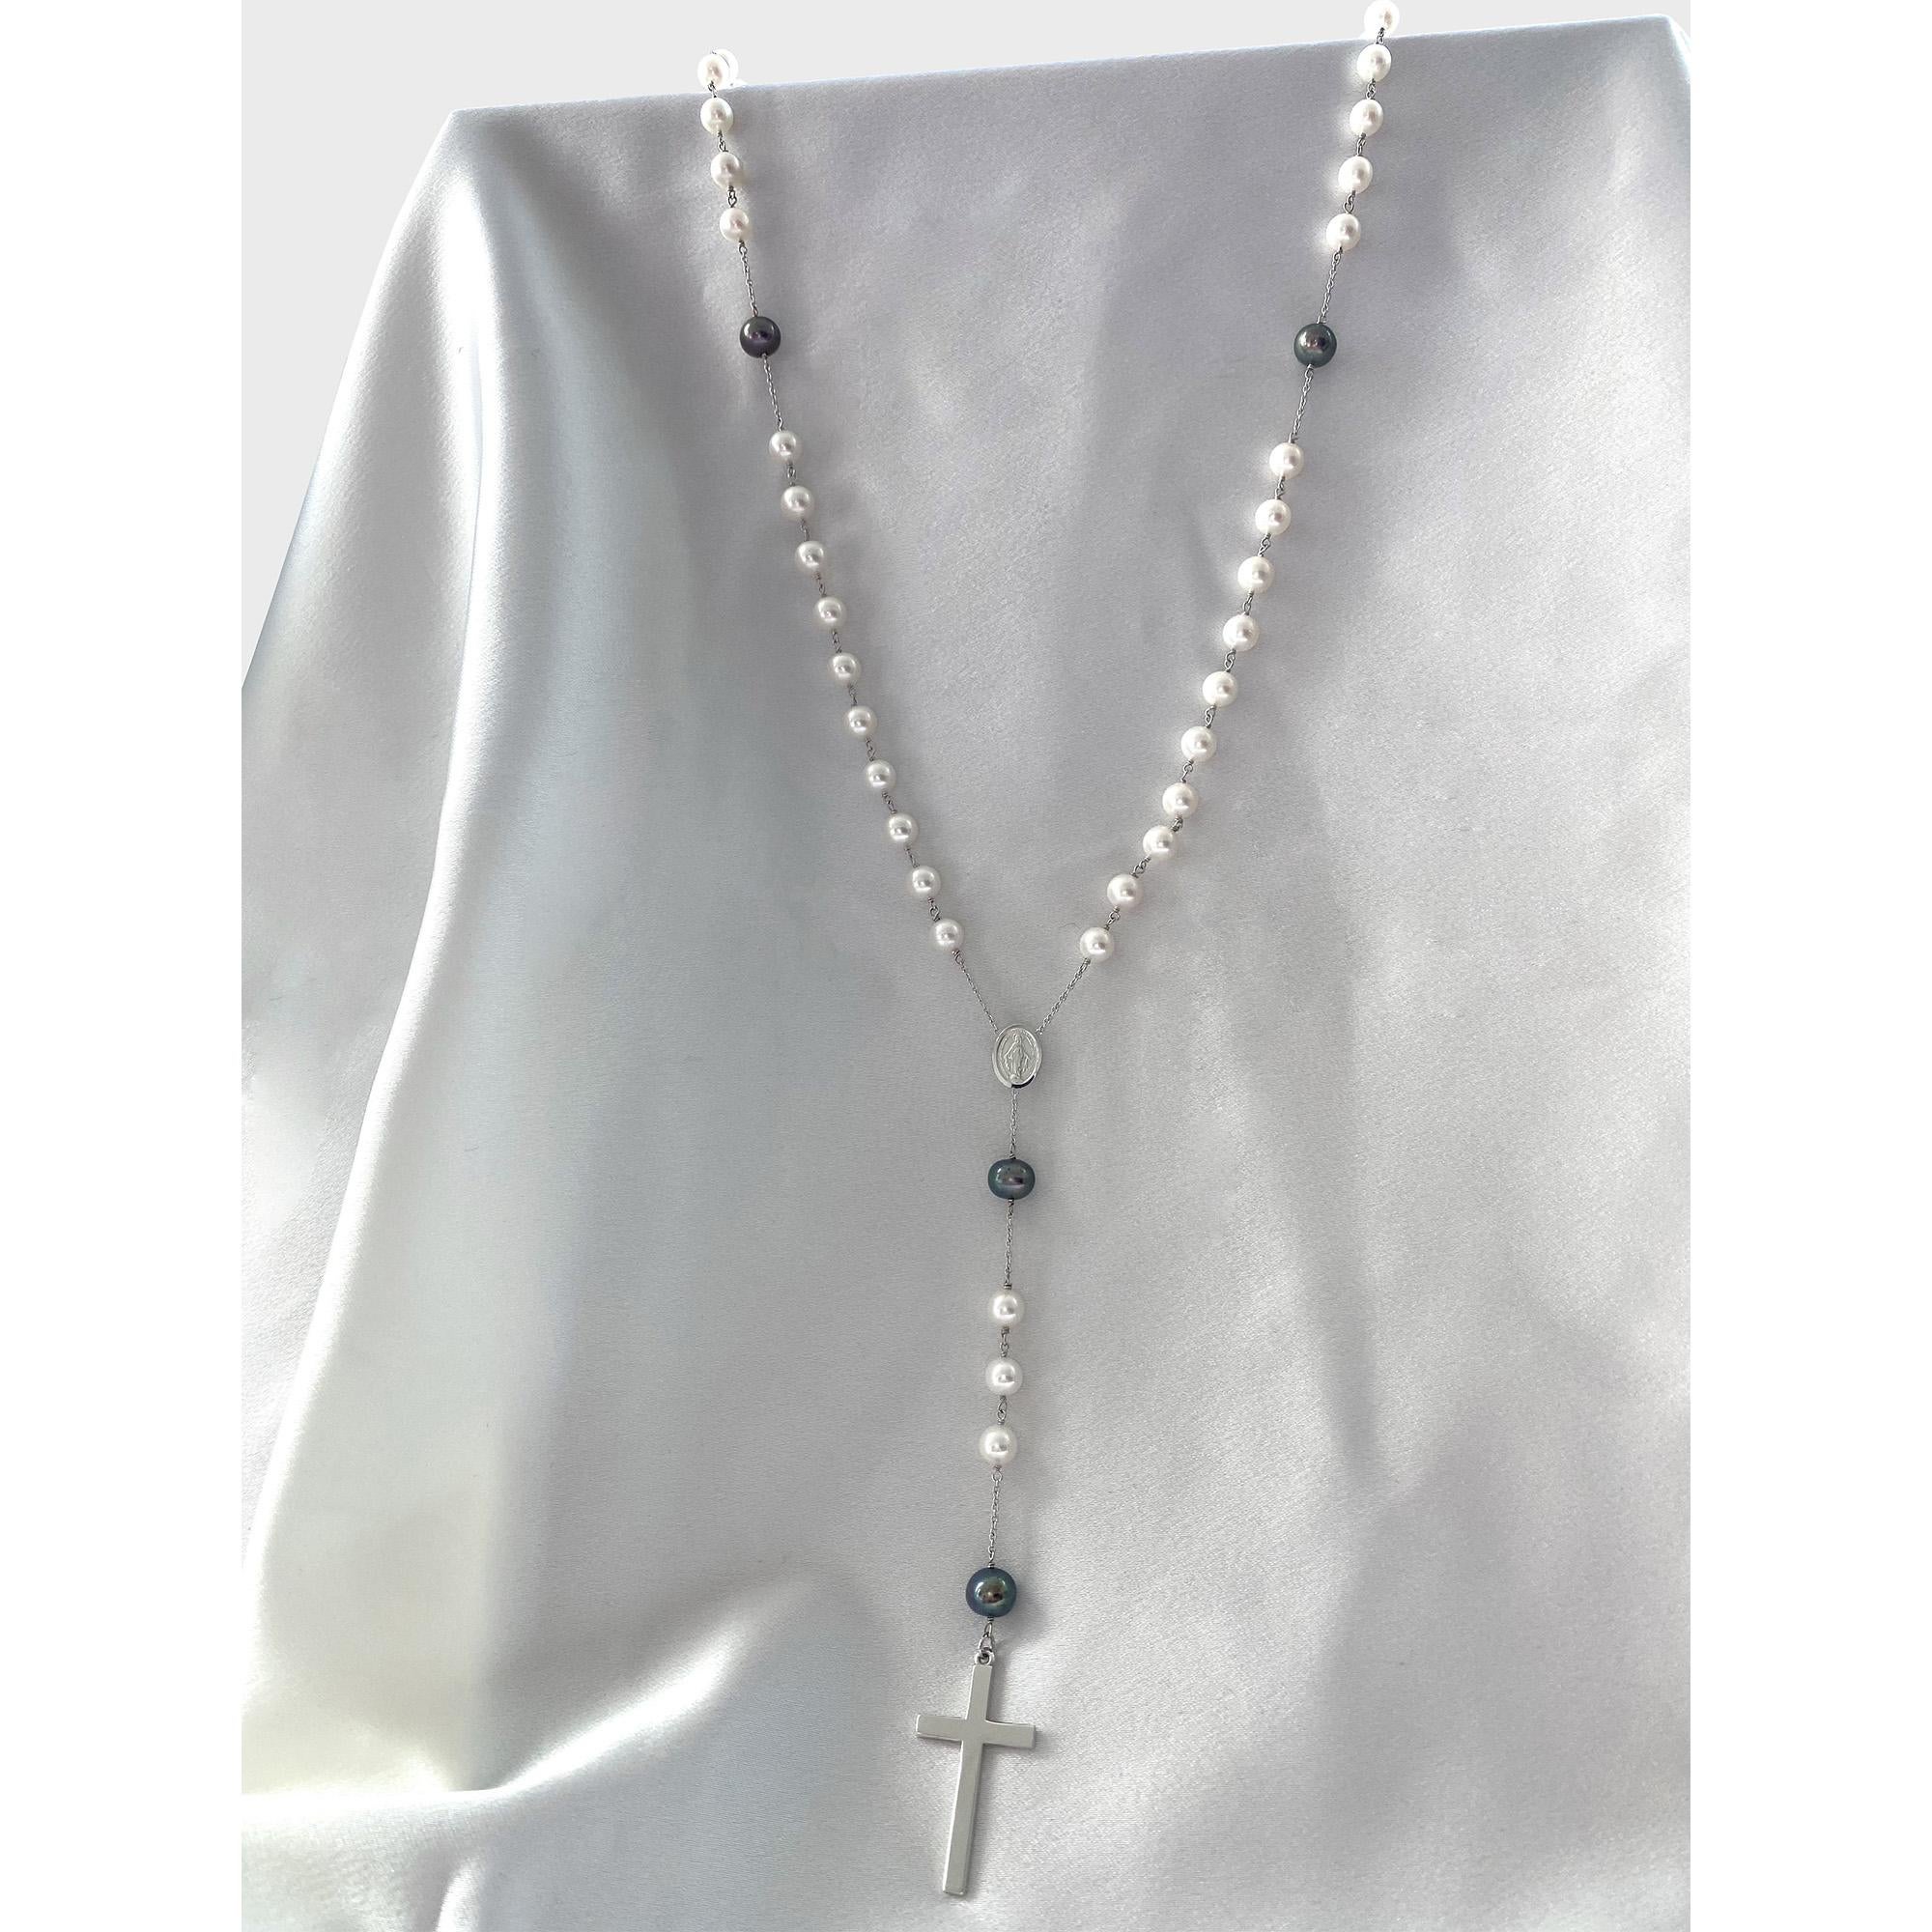 Exclusive Rosary Necklace
Totally Brand New
Natural Akoya Pearl - 53pcs / 6-6,5 mm diameter - Origin: Japan
Natural Black Pearl - 6pcs / 7-7,5 mm diameter - Origin: China
Every other elements are in White Gold 18kt (Cross, Mary, Chains and the